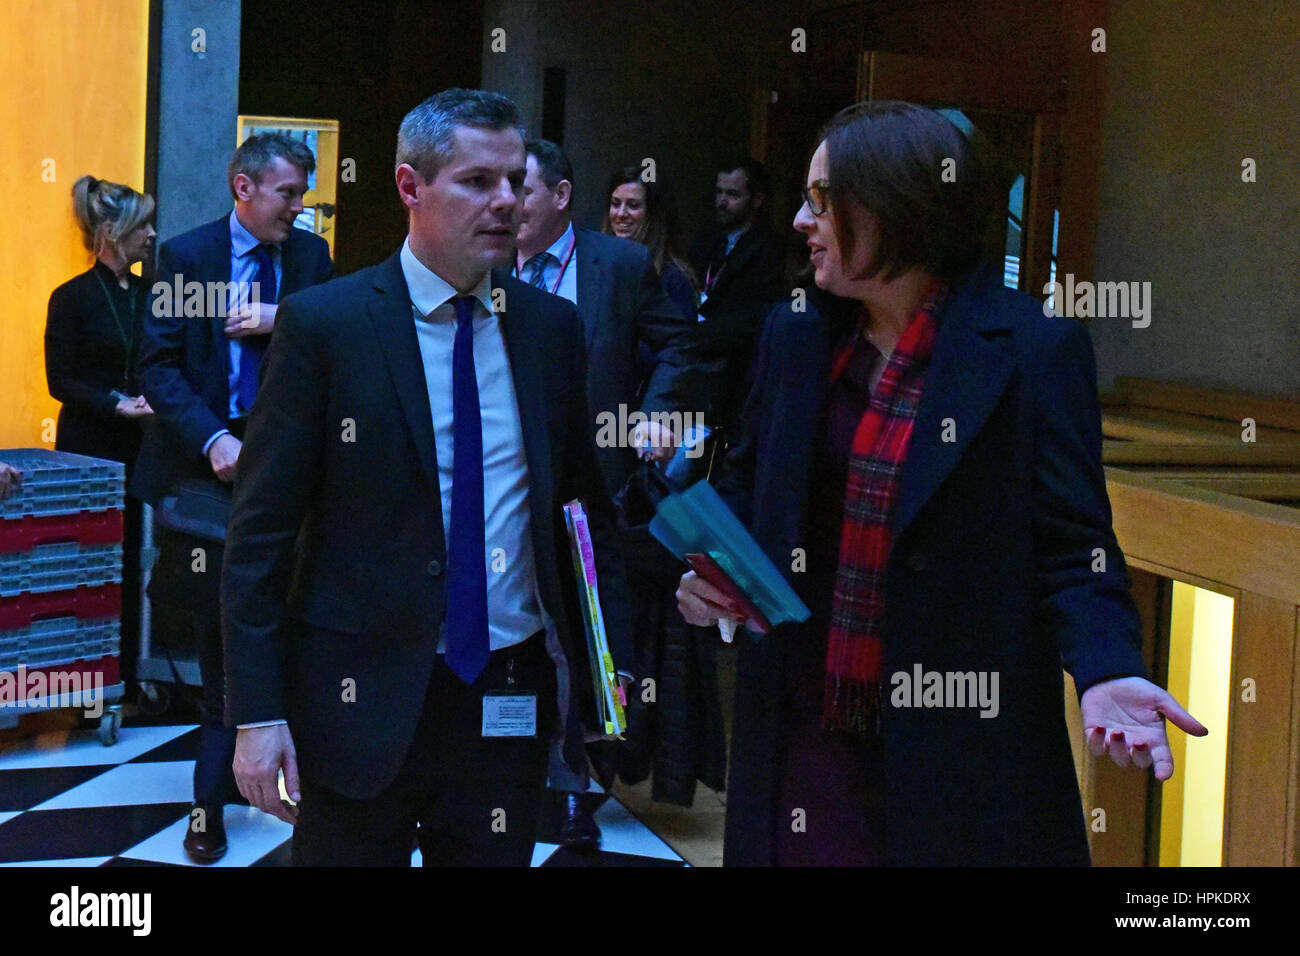 Edinburgh, Scotland, United Kingdom. 23rd February, 2017. Scottish Finance Secretary Derek Mackay chats to Scottish Labour leader Kezia Dugdale as they leave the chamber of the Scottish Parliament folowing the Stage Three debate on the Scottish budget, which the Government won. Credit: Ken Jack/Alamy Live News Stock Photo